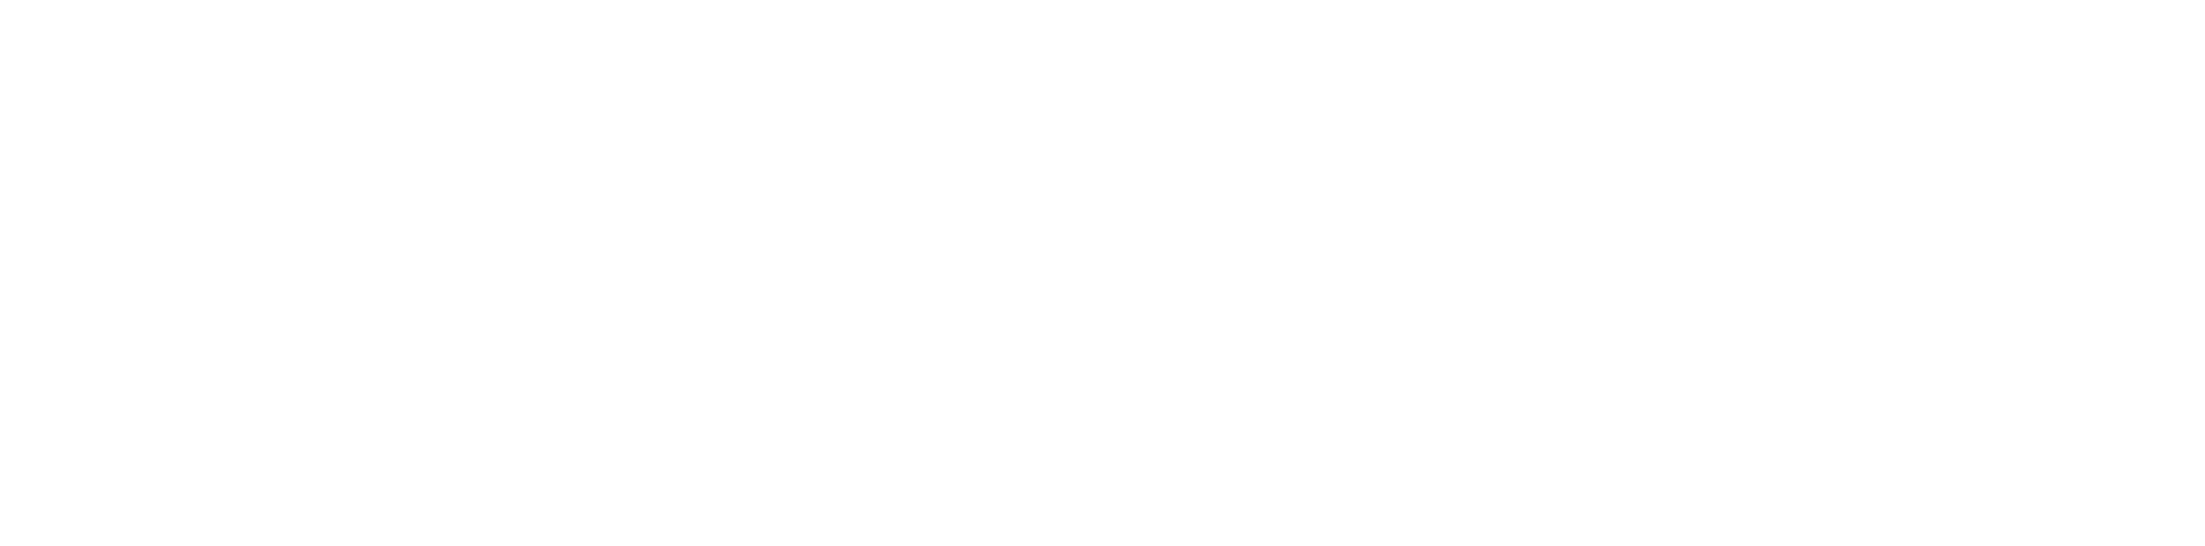 Decisions logo in white